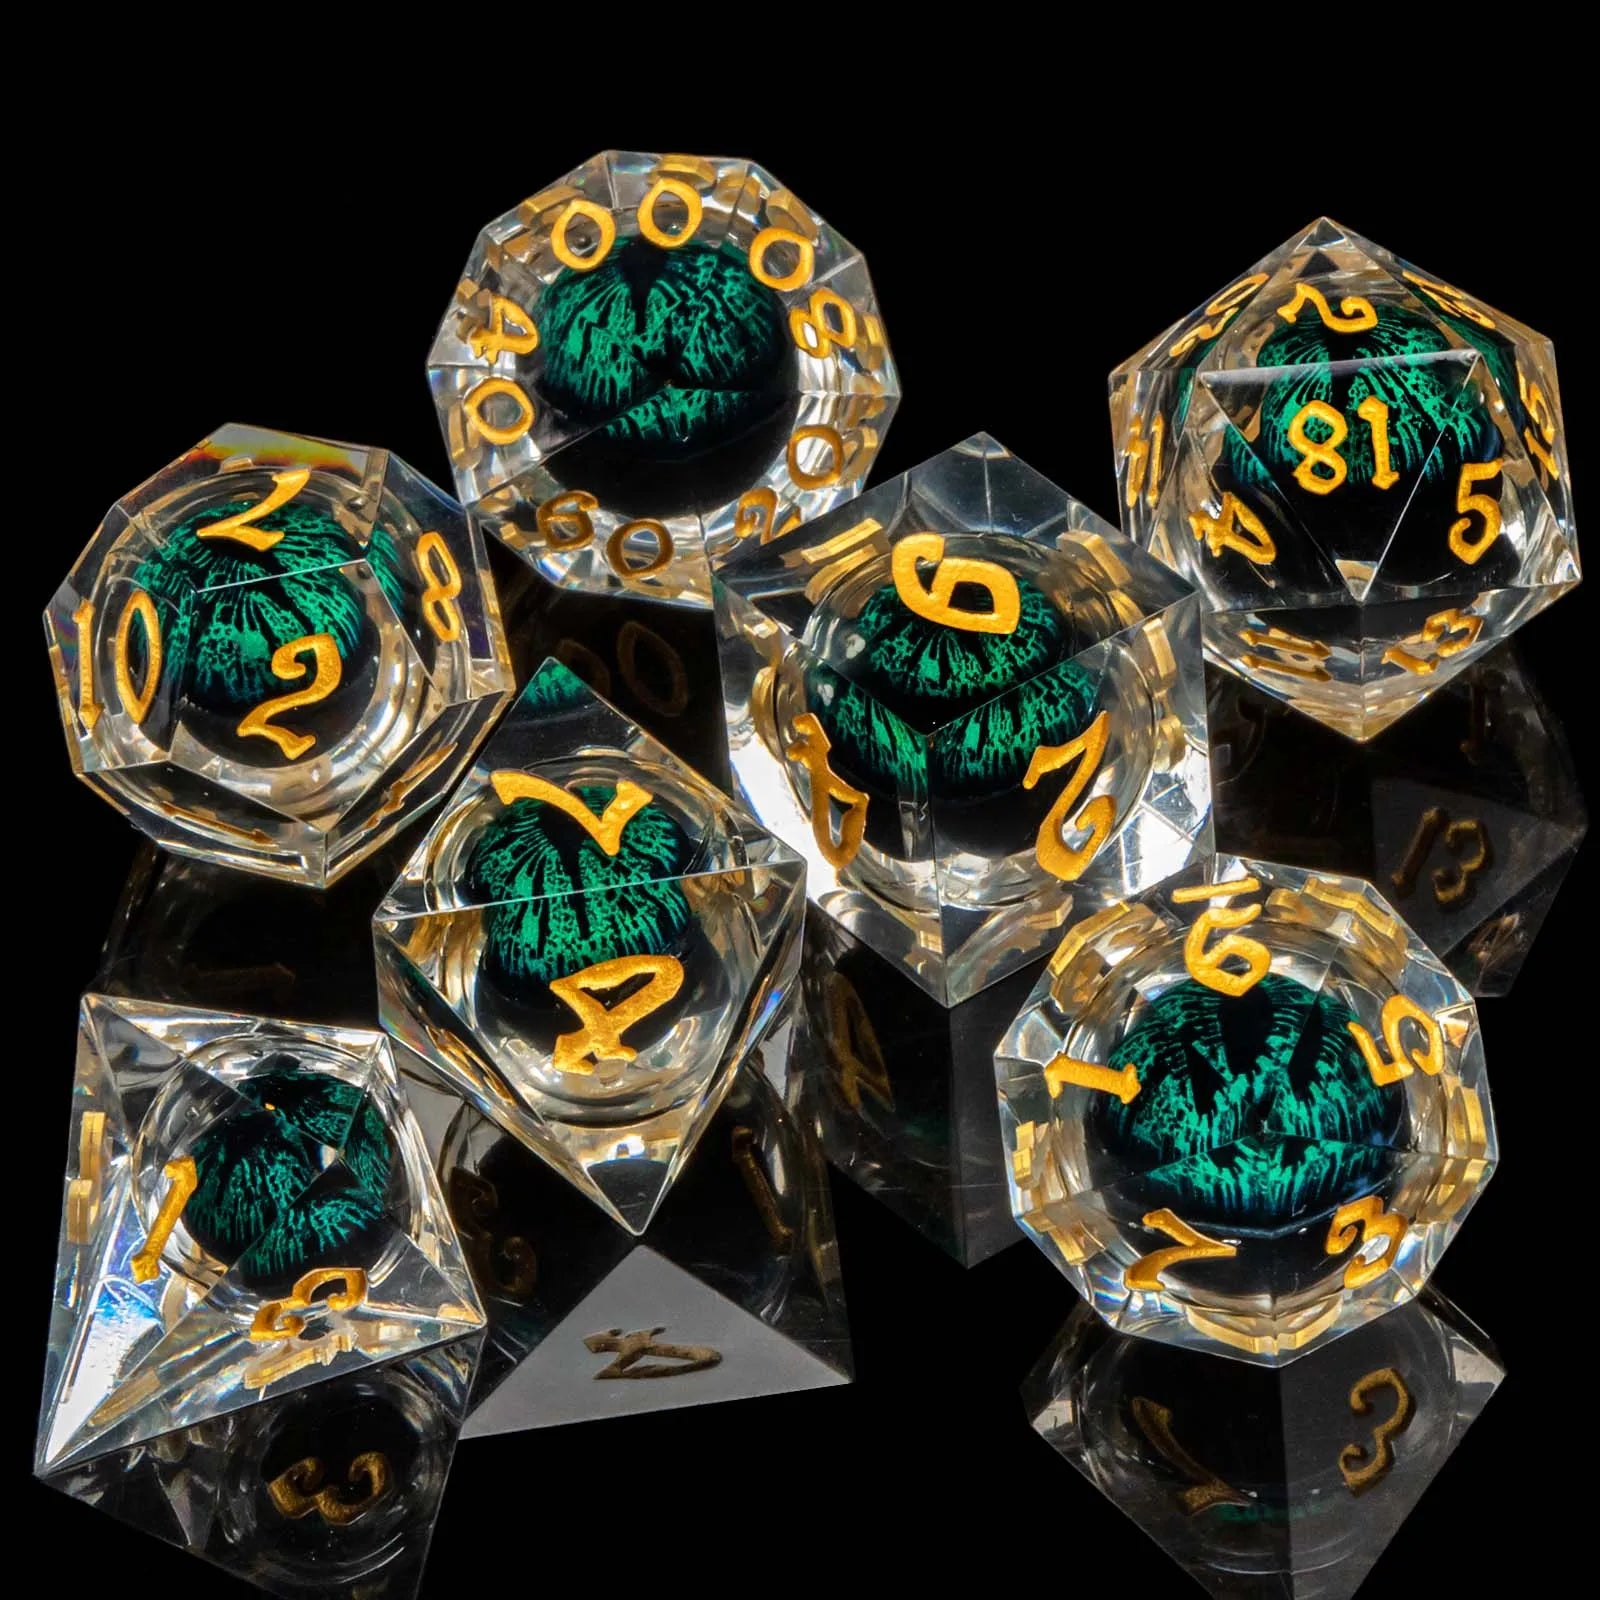 DND Eye Liquid Flow Core Resin D&D Dice Set For D and D Dungeon and Dragon Pathfinder Table Role Playing Game Polyhedral Dice AZ13